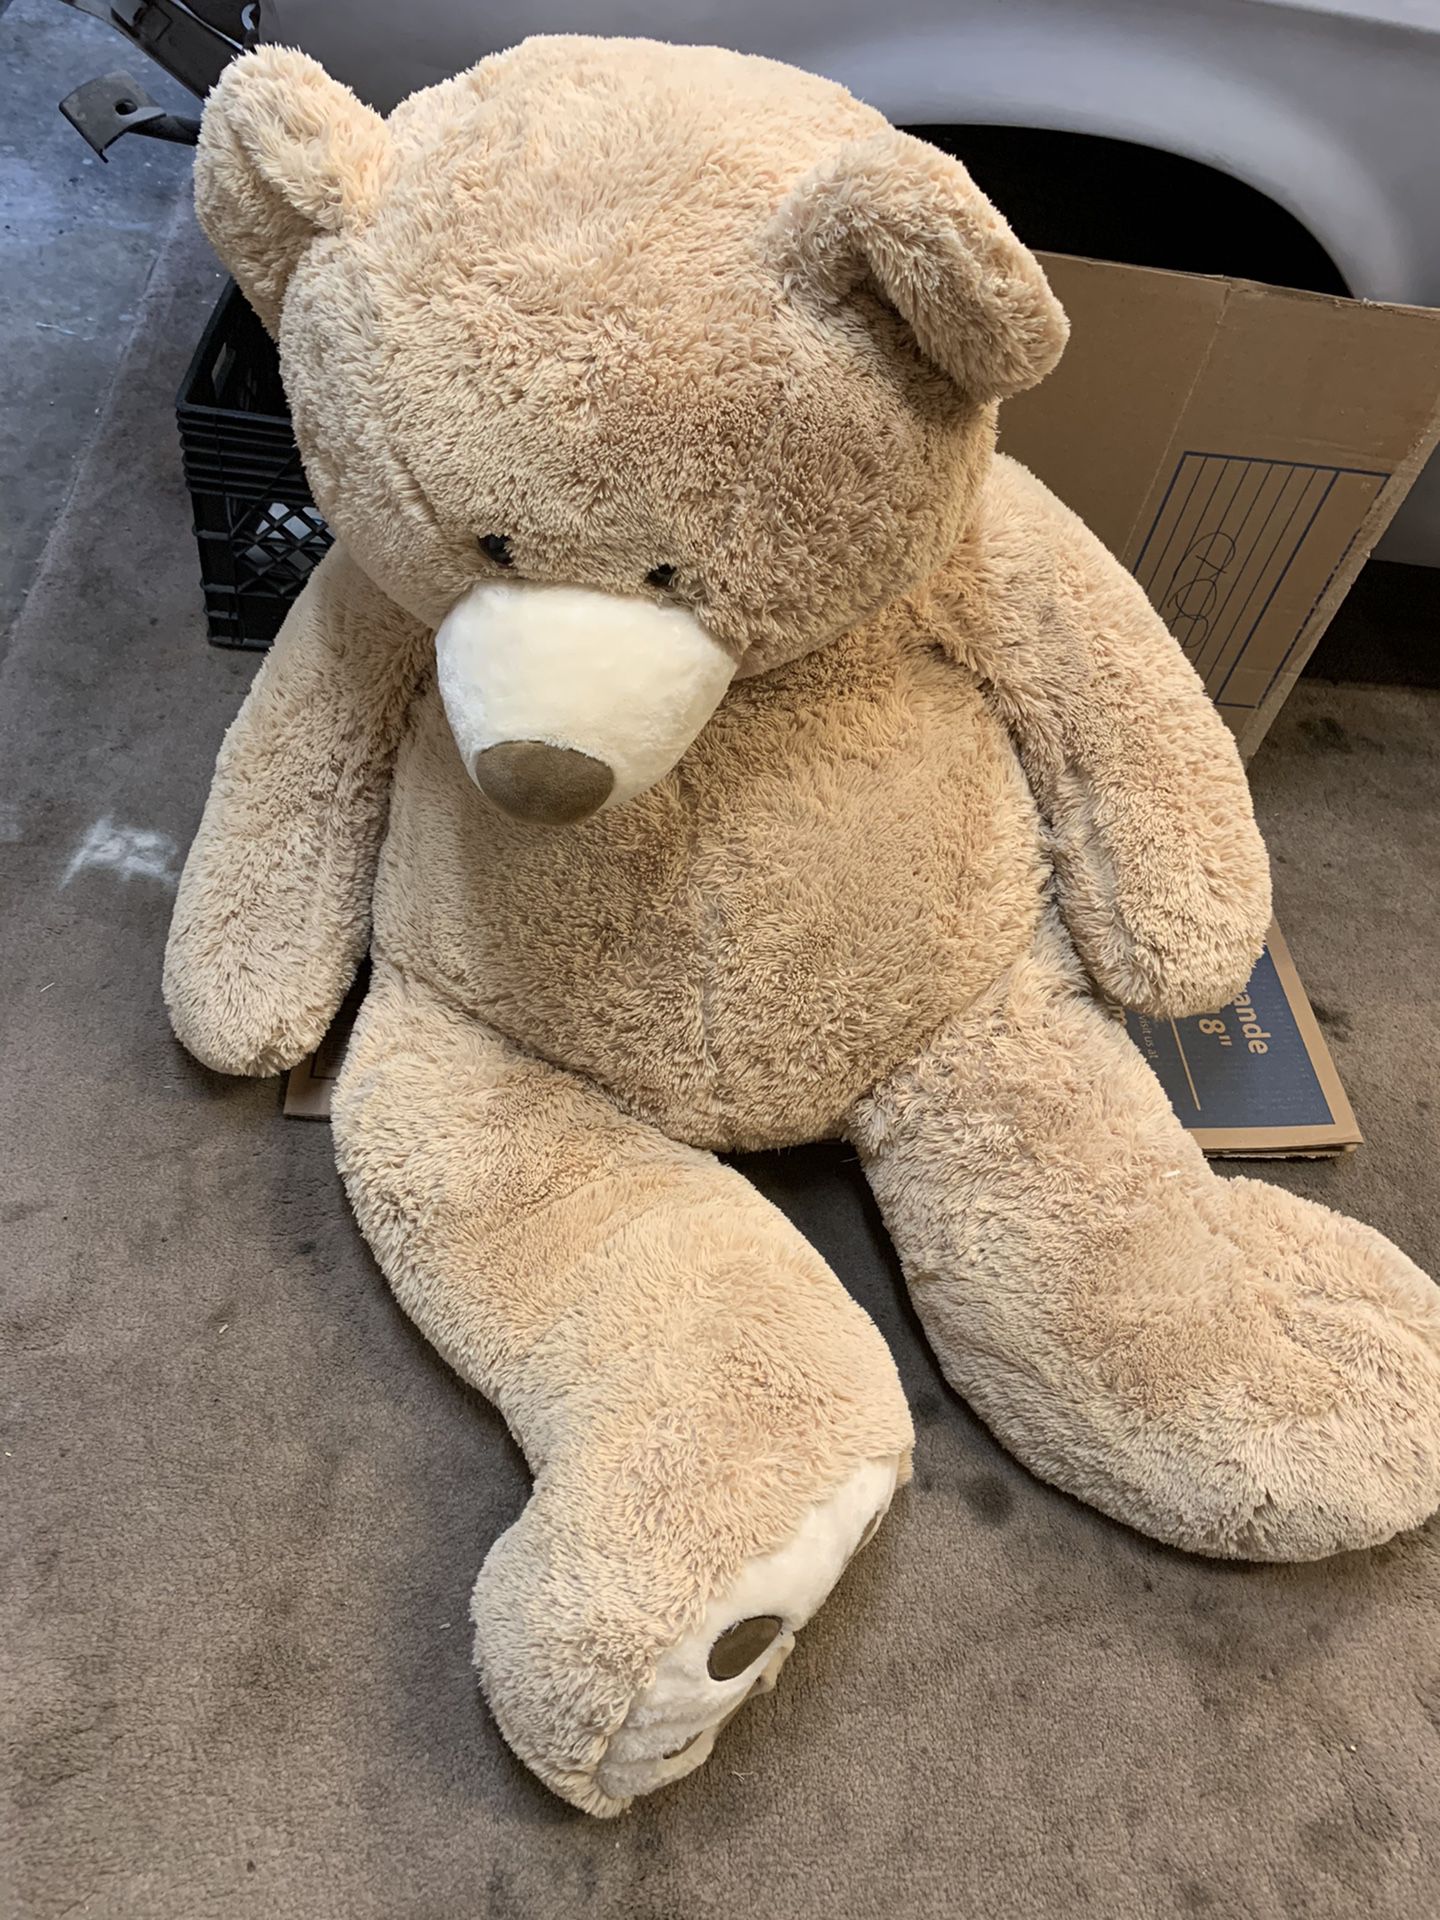 Huge 5 ft teddy bear great condition - no smoking or pets - needs new home - great Christmas gift!